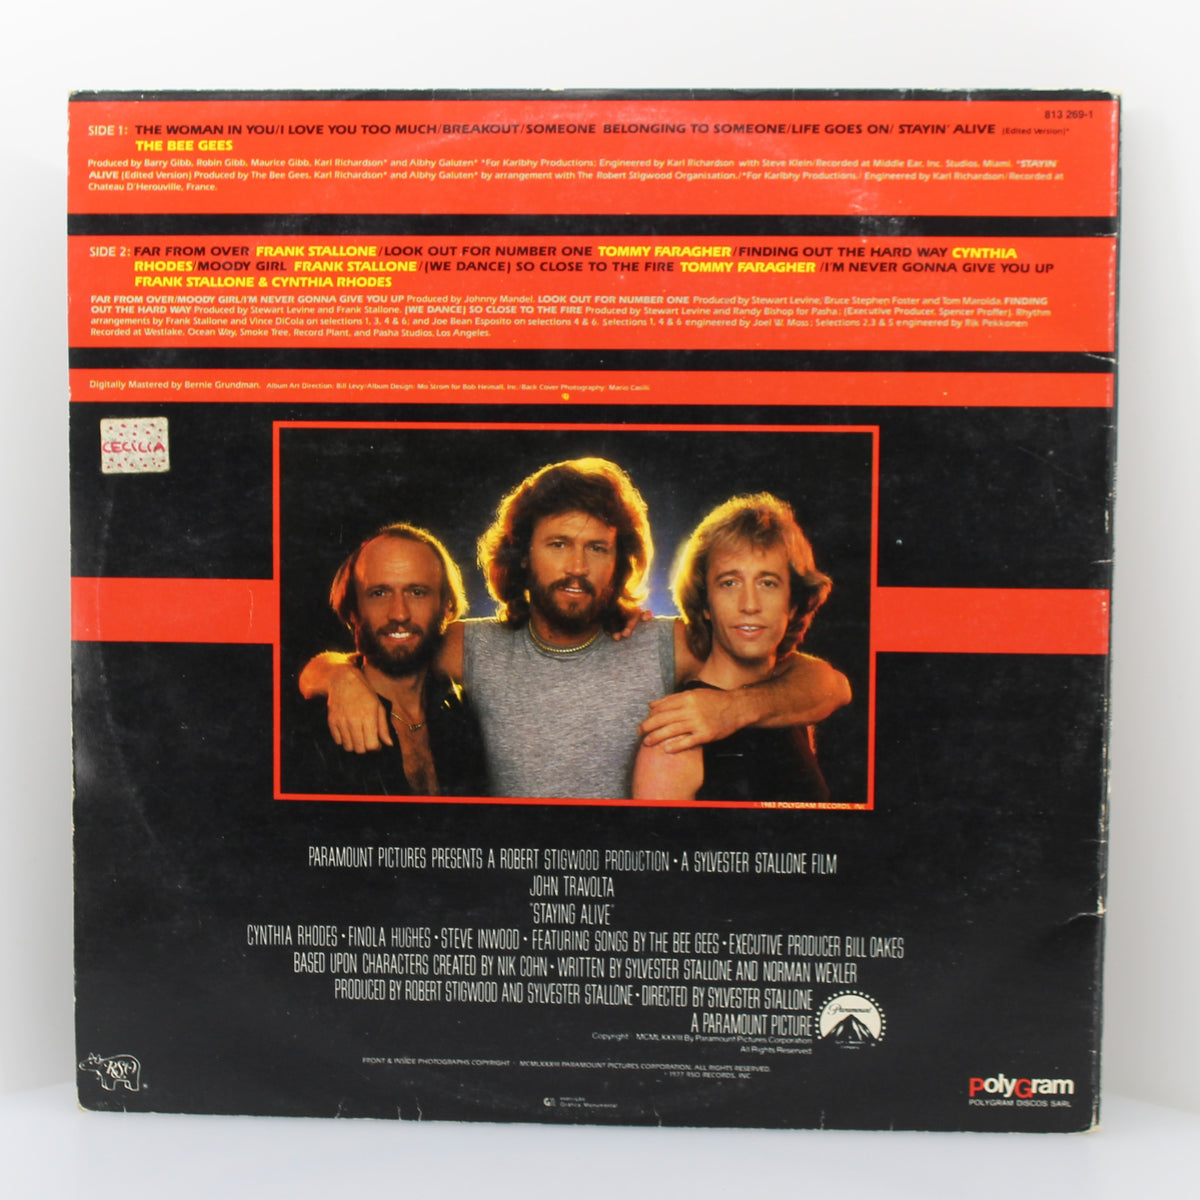 Bee Gees -  The Original Motion Picture Soundtrack Staying Alive, Vinyl LP 33Rpm Album, Portugal 1983